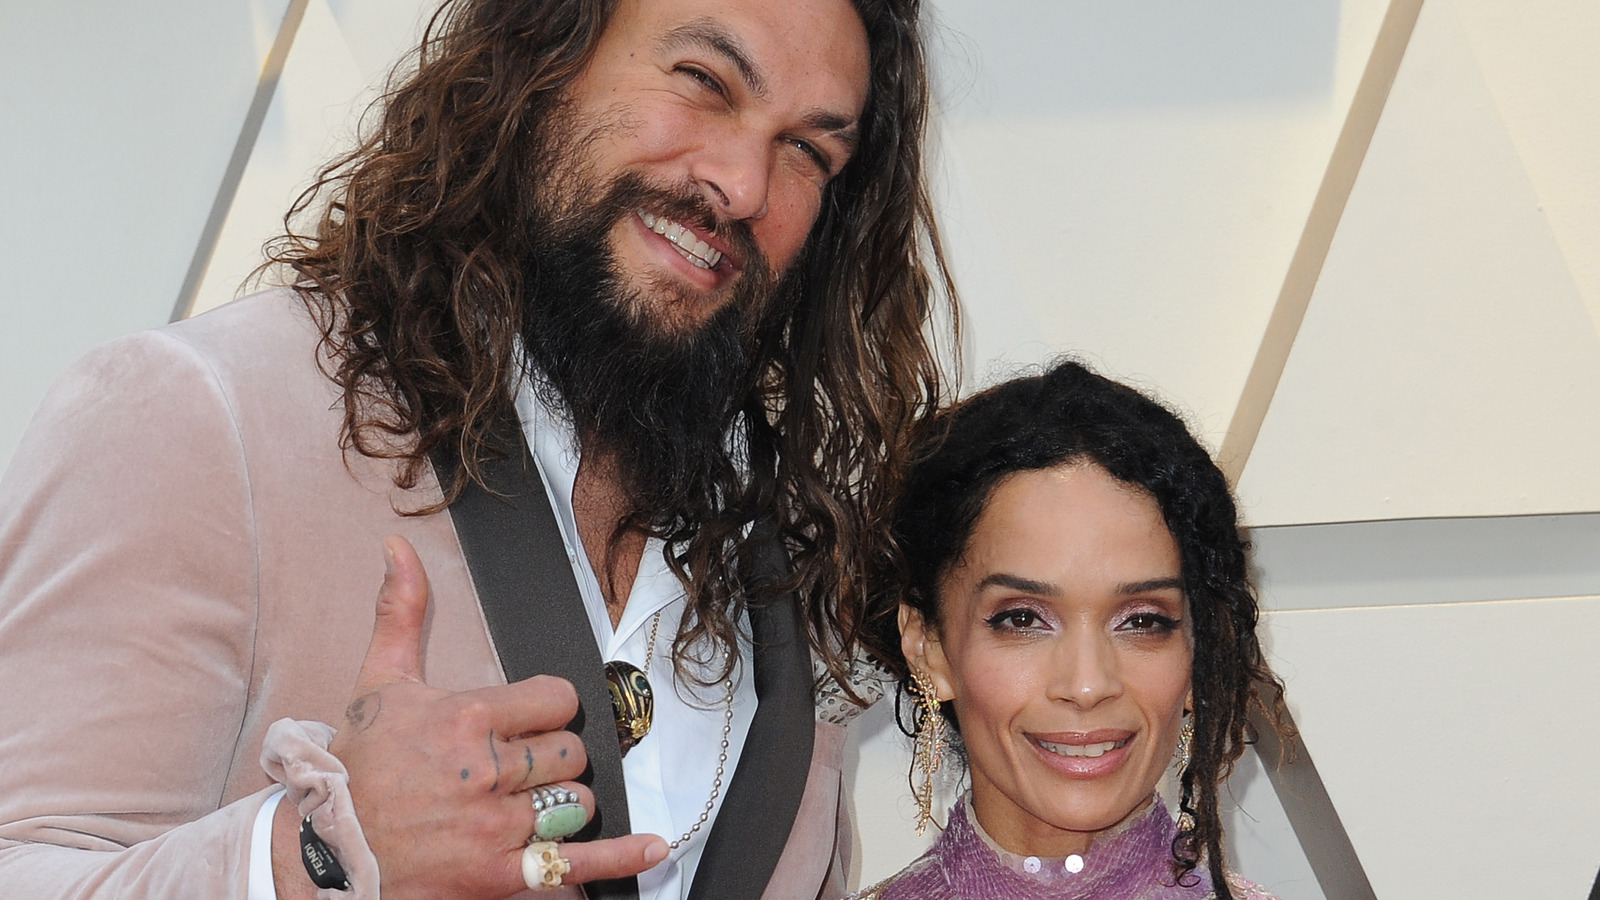 Rumors Are Swirling That Jason Momoa And Lisa Bonet Could Be Reconciling